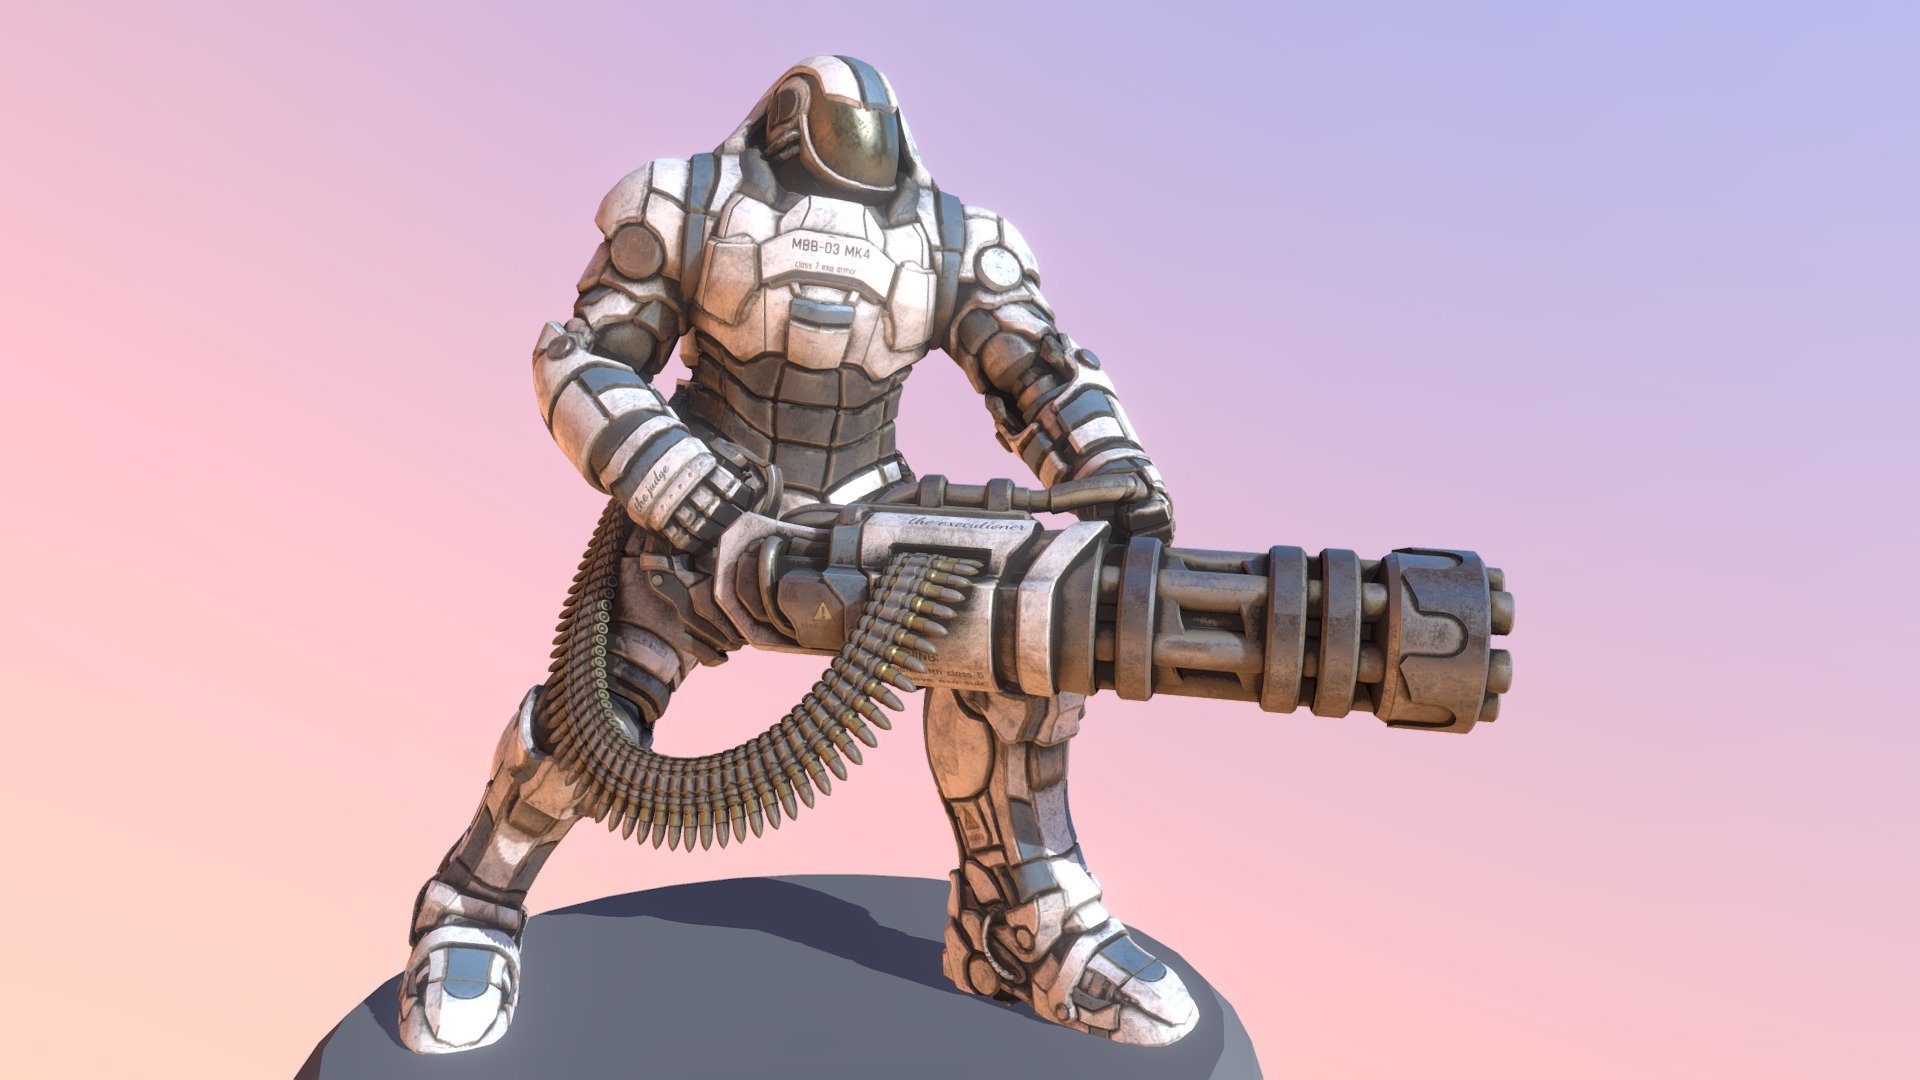 Modelled with blender and textured with substance painter.
Been working on this project for over two weeks now, started off in the train where i made the minigun parts and then decided to make a suit to carry it. i used concepts from random sources but mainly W.40k for the hands.
i still have other cool ideas for this suit so i might make another version of it soon with different weapons and poses :p

posted it on artstation too: https://www.artstation.com/artwork/oOoGzz - sci-fi heavy armor: MMB-03 Mk4 "Colossus" - 3D model by guillaume bolis (@guillaume.bolis) 3d model